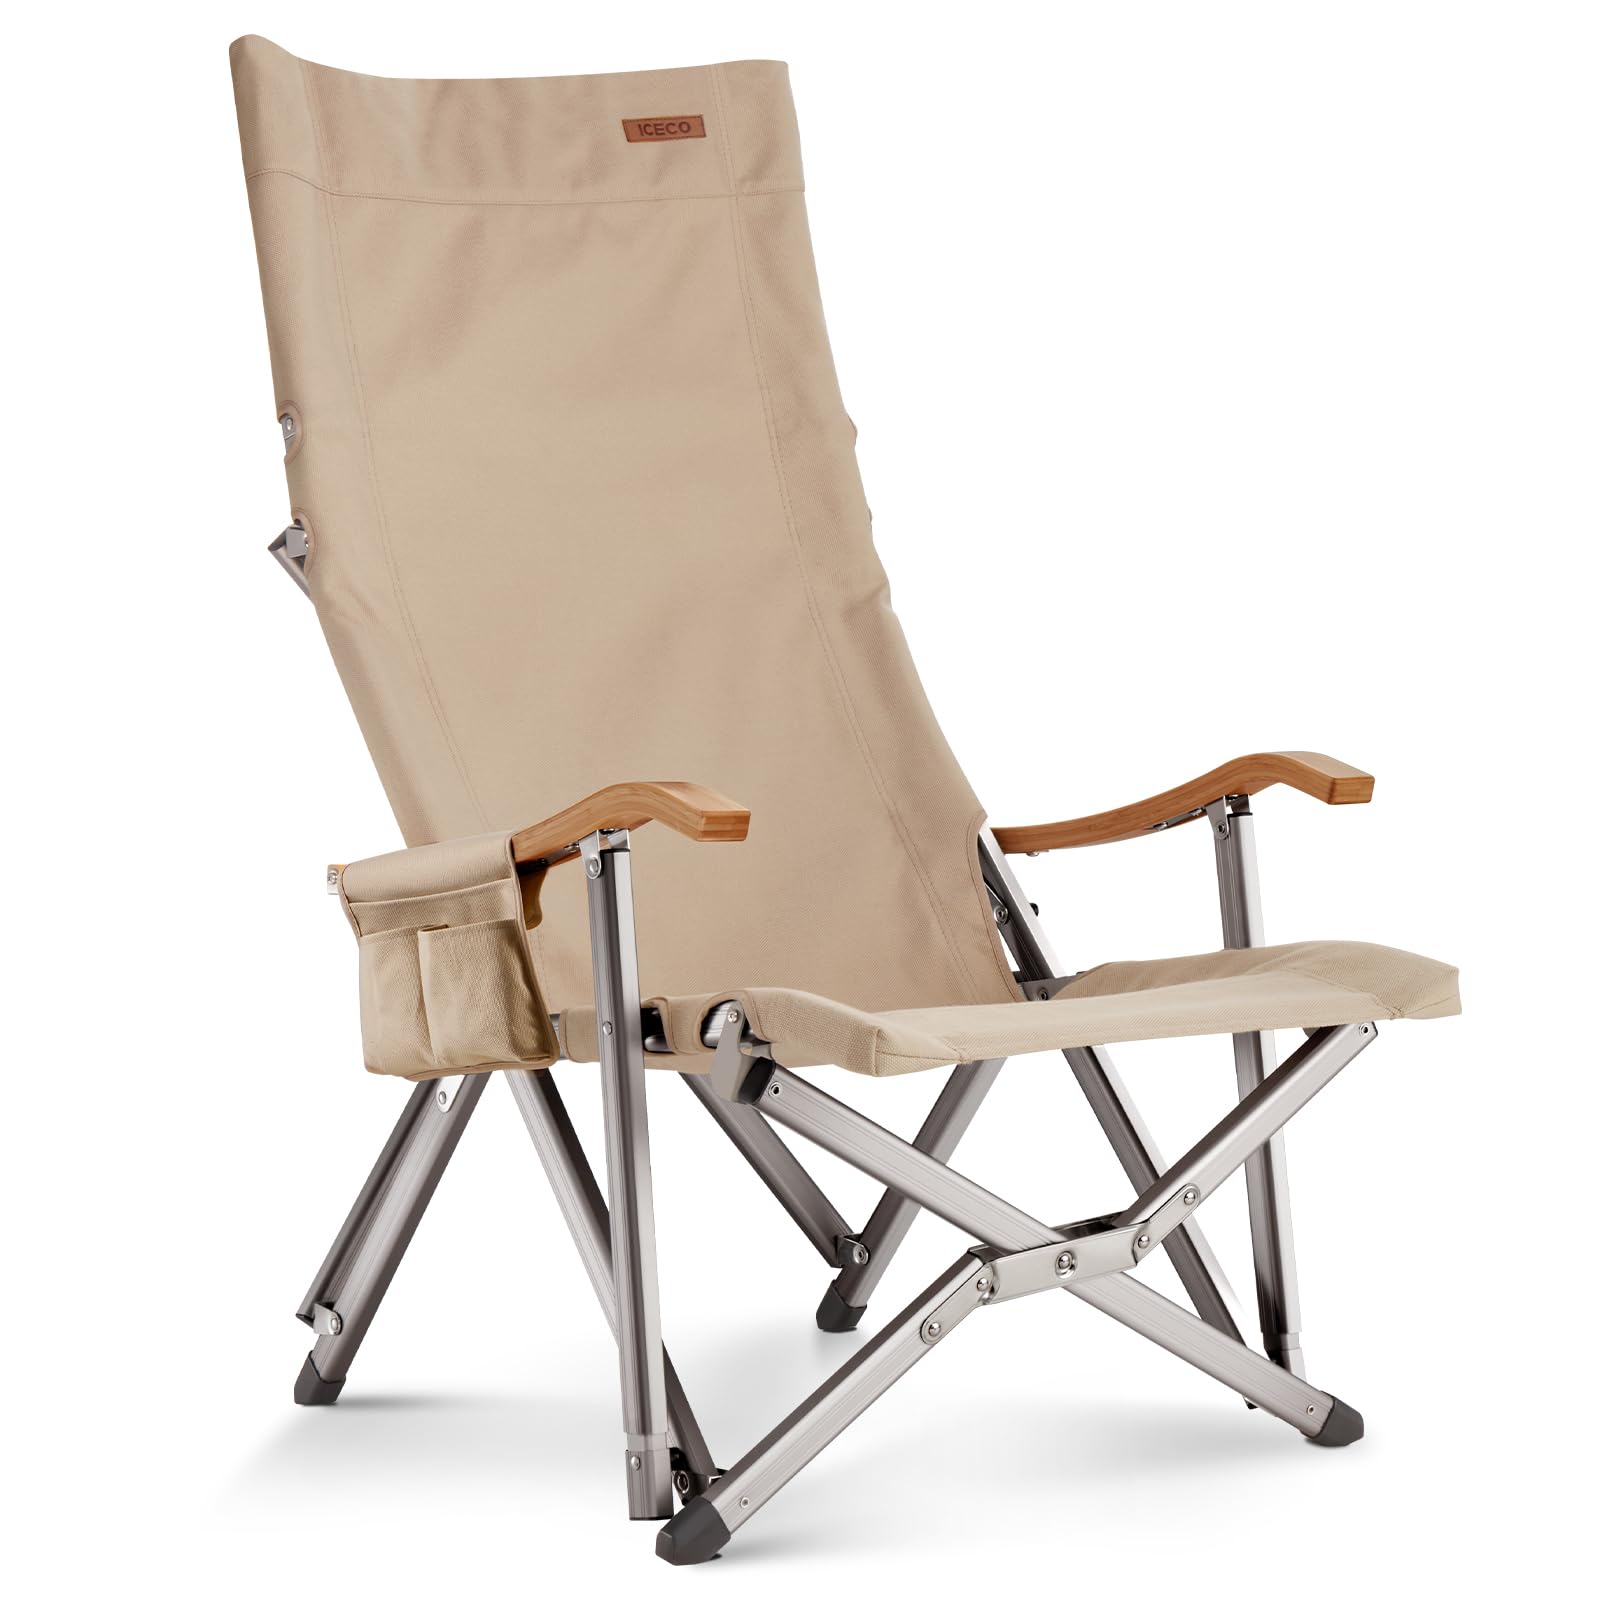 Hi1600L Folding Camping Chairs for Outside | ICECO-Outdoor Gear-www.icecofreezer.com